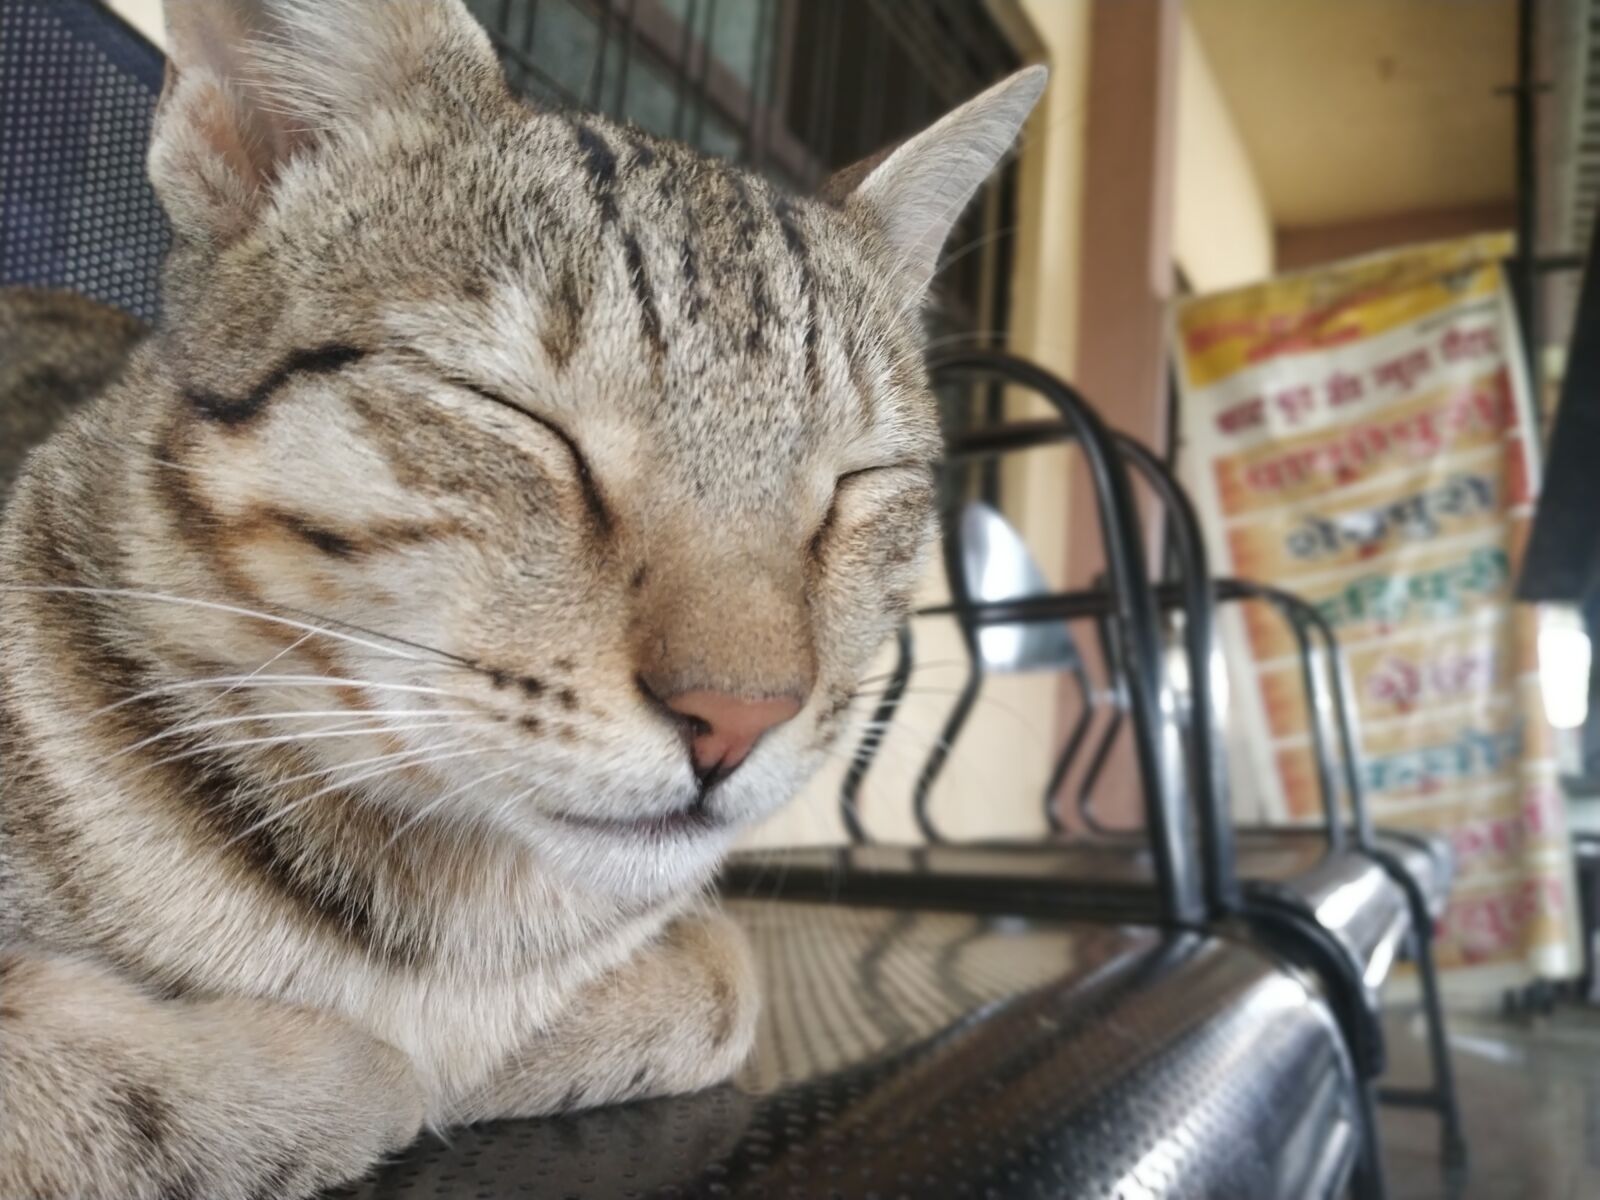 Xiaomi Redmi Note 5 Pro sample photo. Cat, lovecats, catlover photography